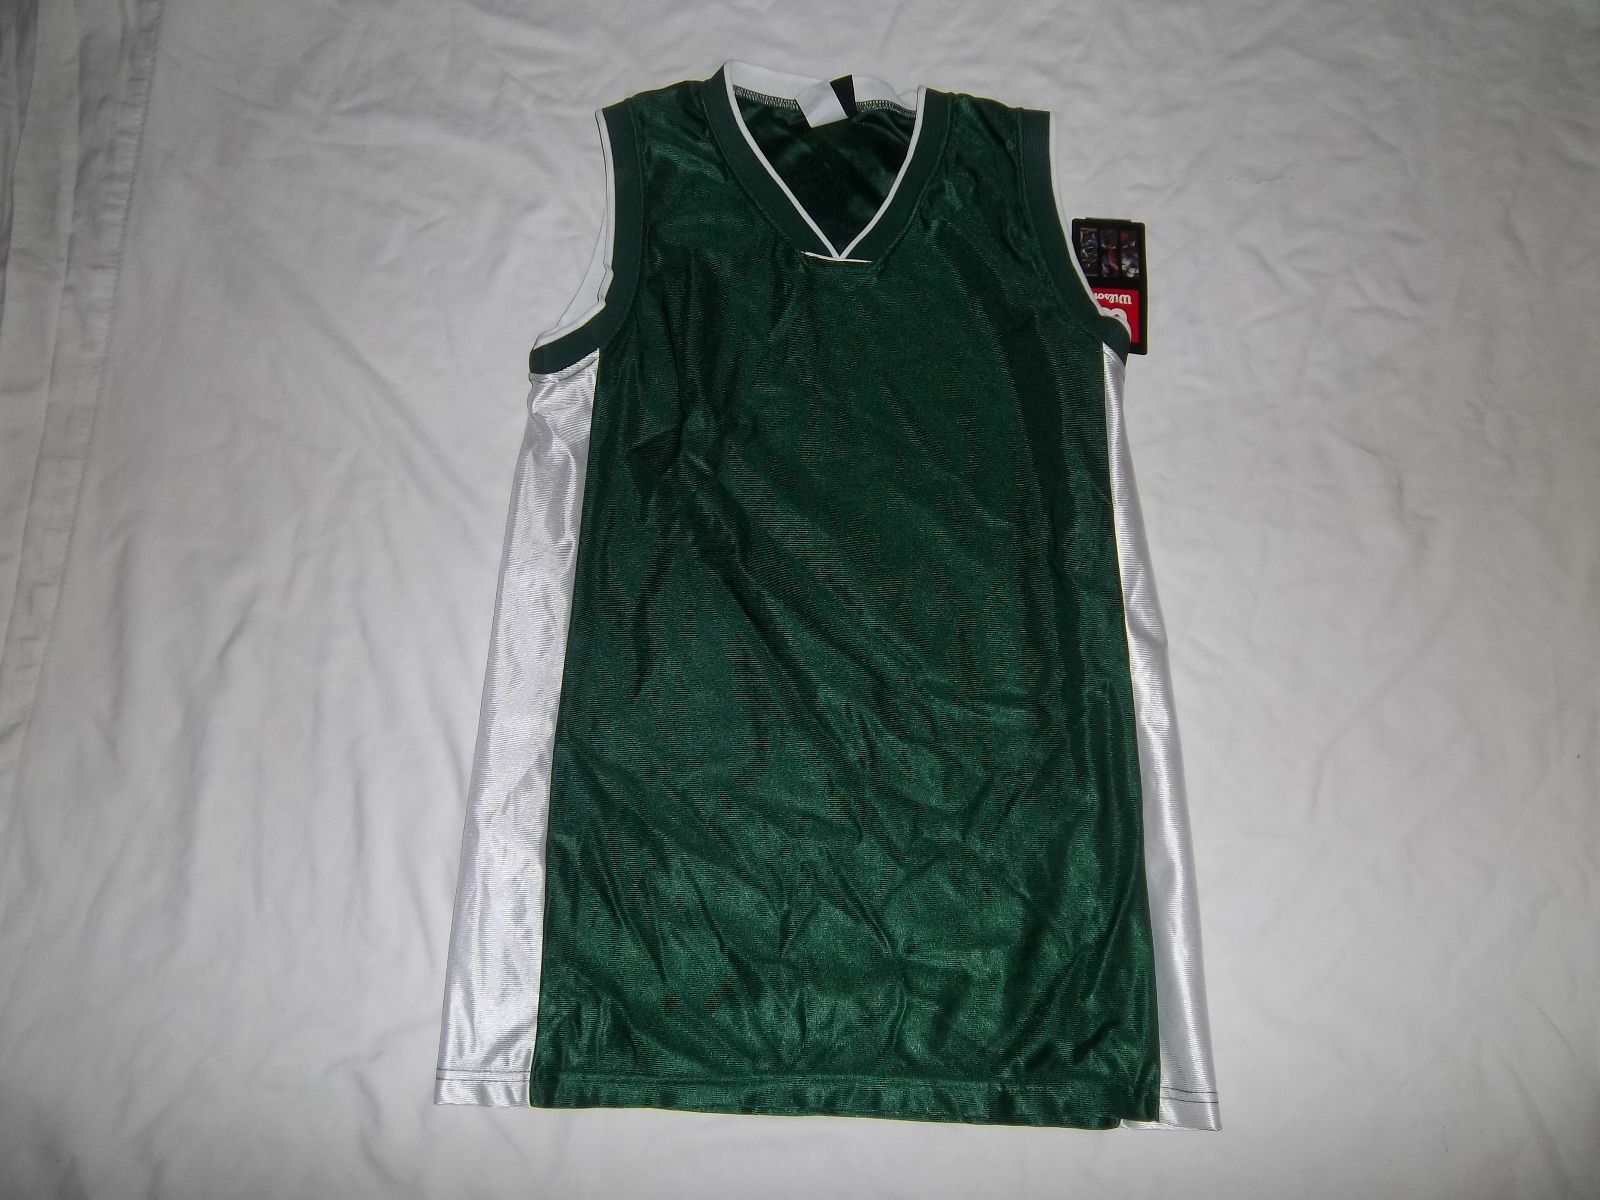 WILSON B4345  BASKETBALL JERSEYS - VARIOUS COLORS AND SIZES